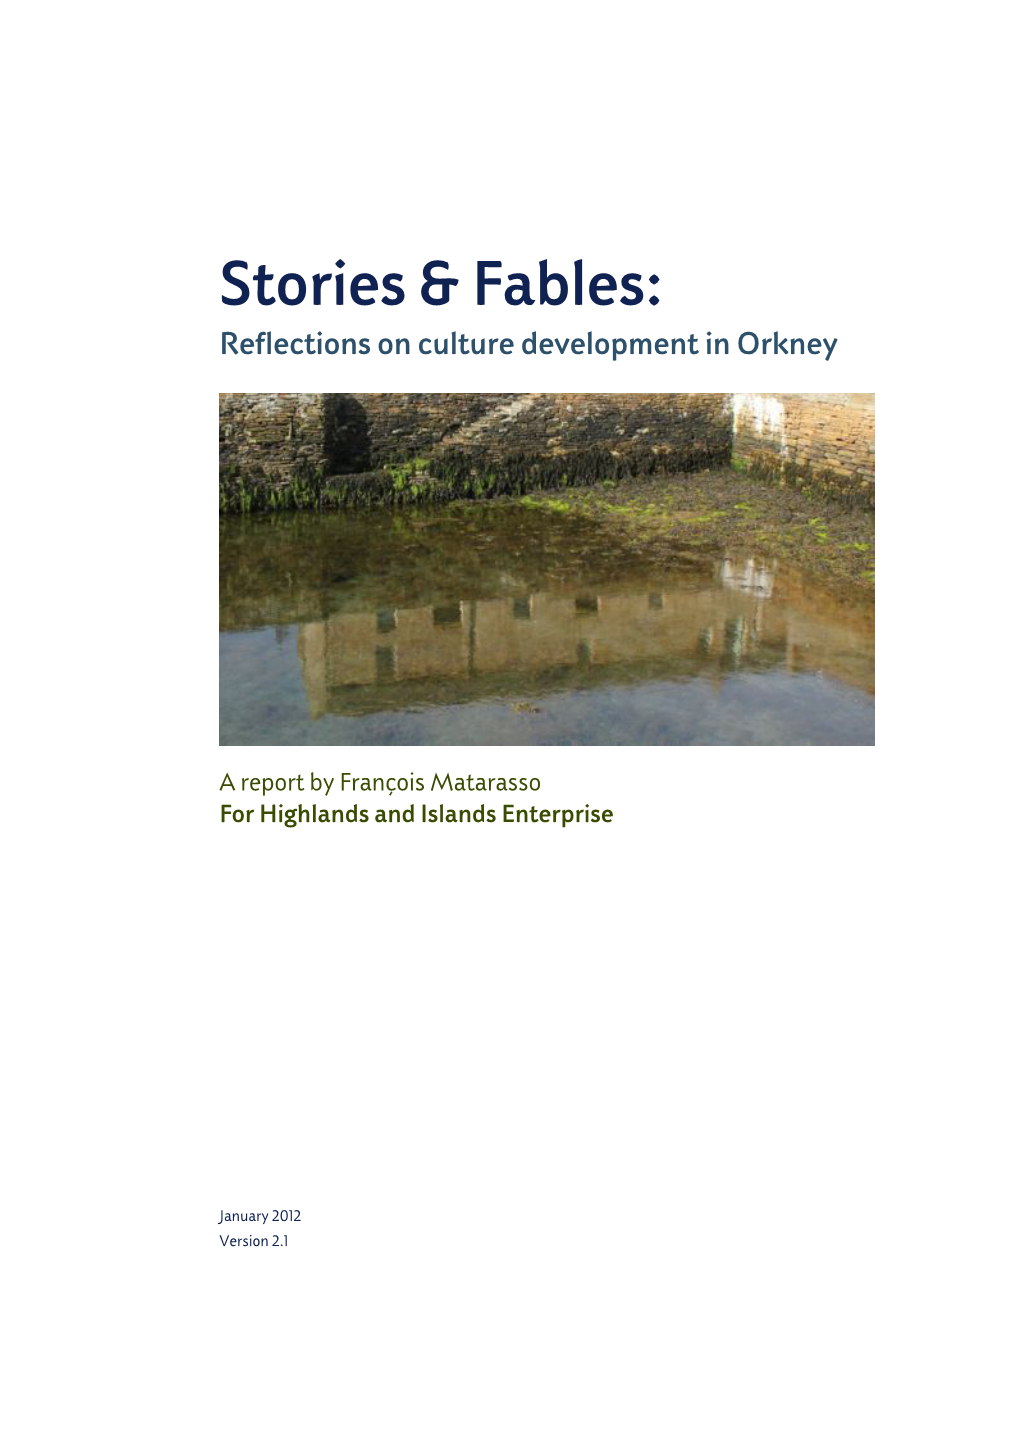 Stories and Fables, Reflections on Culture Development in Orkney 2 | 89